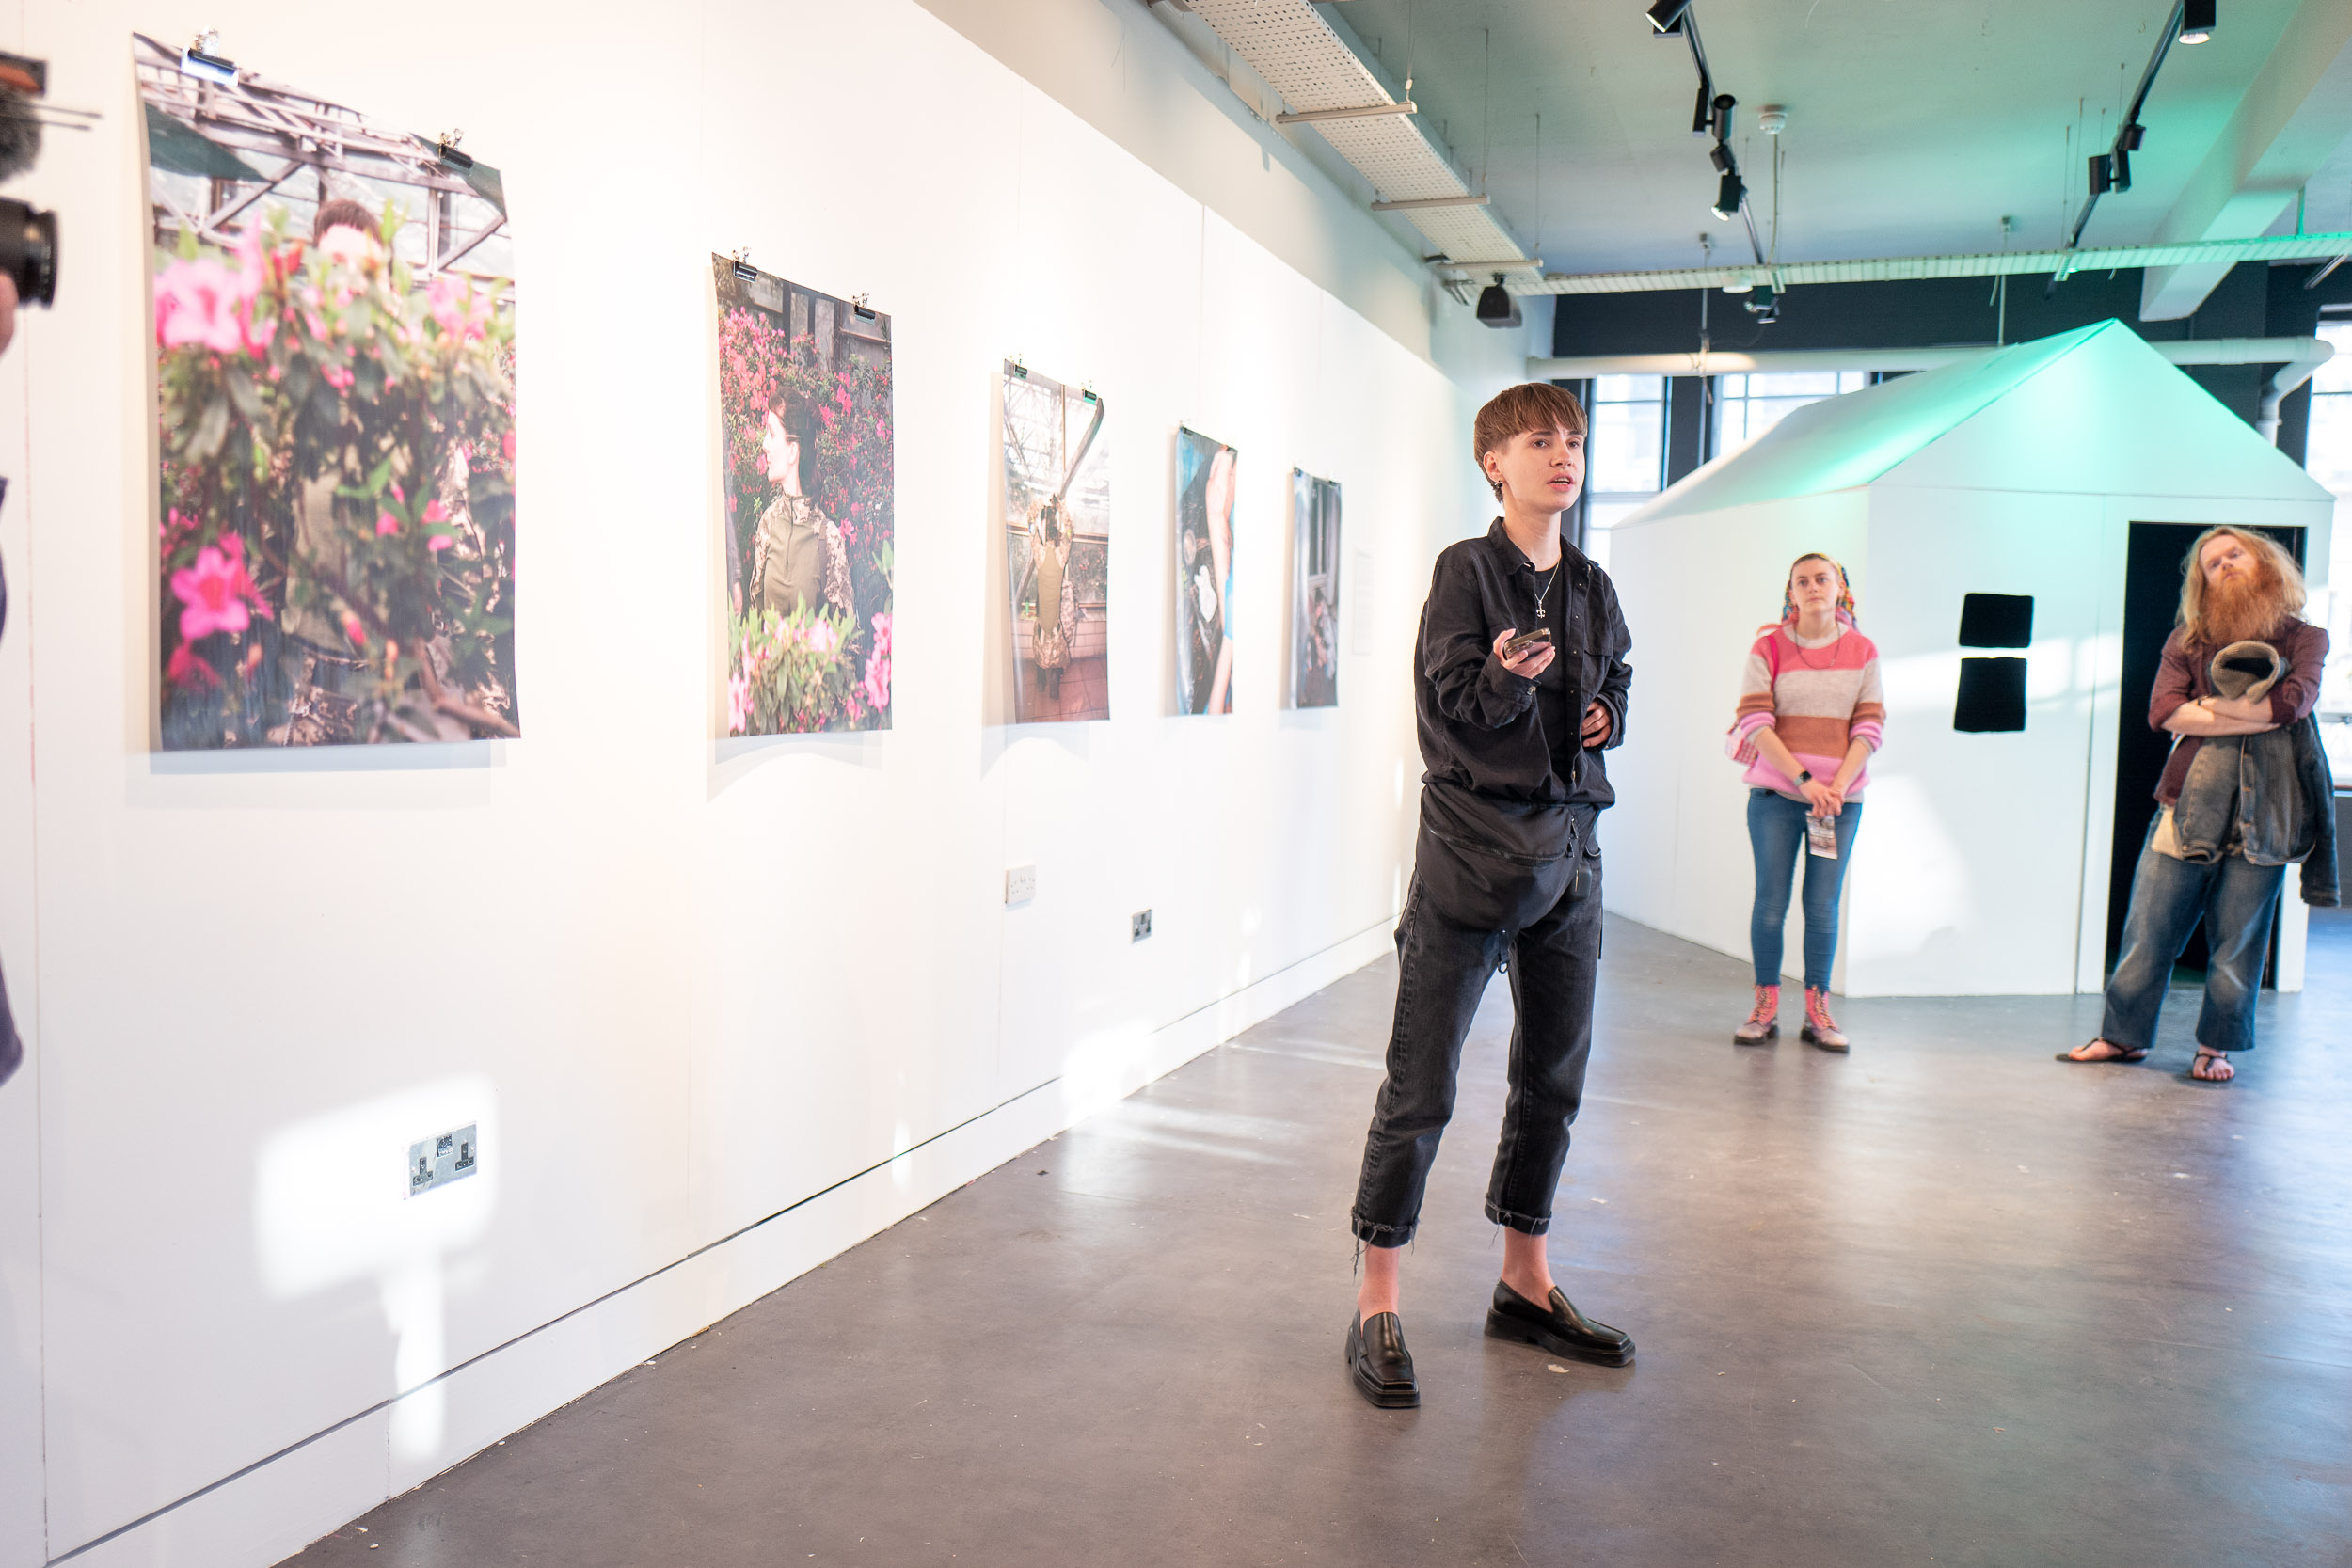 A woman addresses an audience at a gallery launch. There are photos of pink flowers and a woman in military gear behind them.